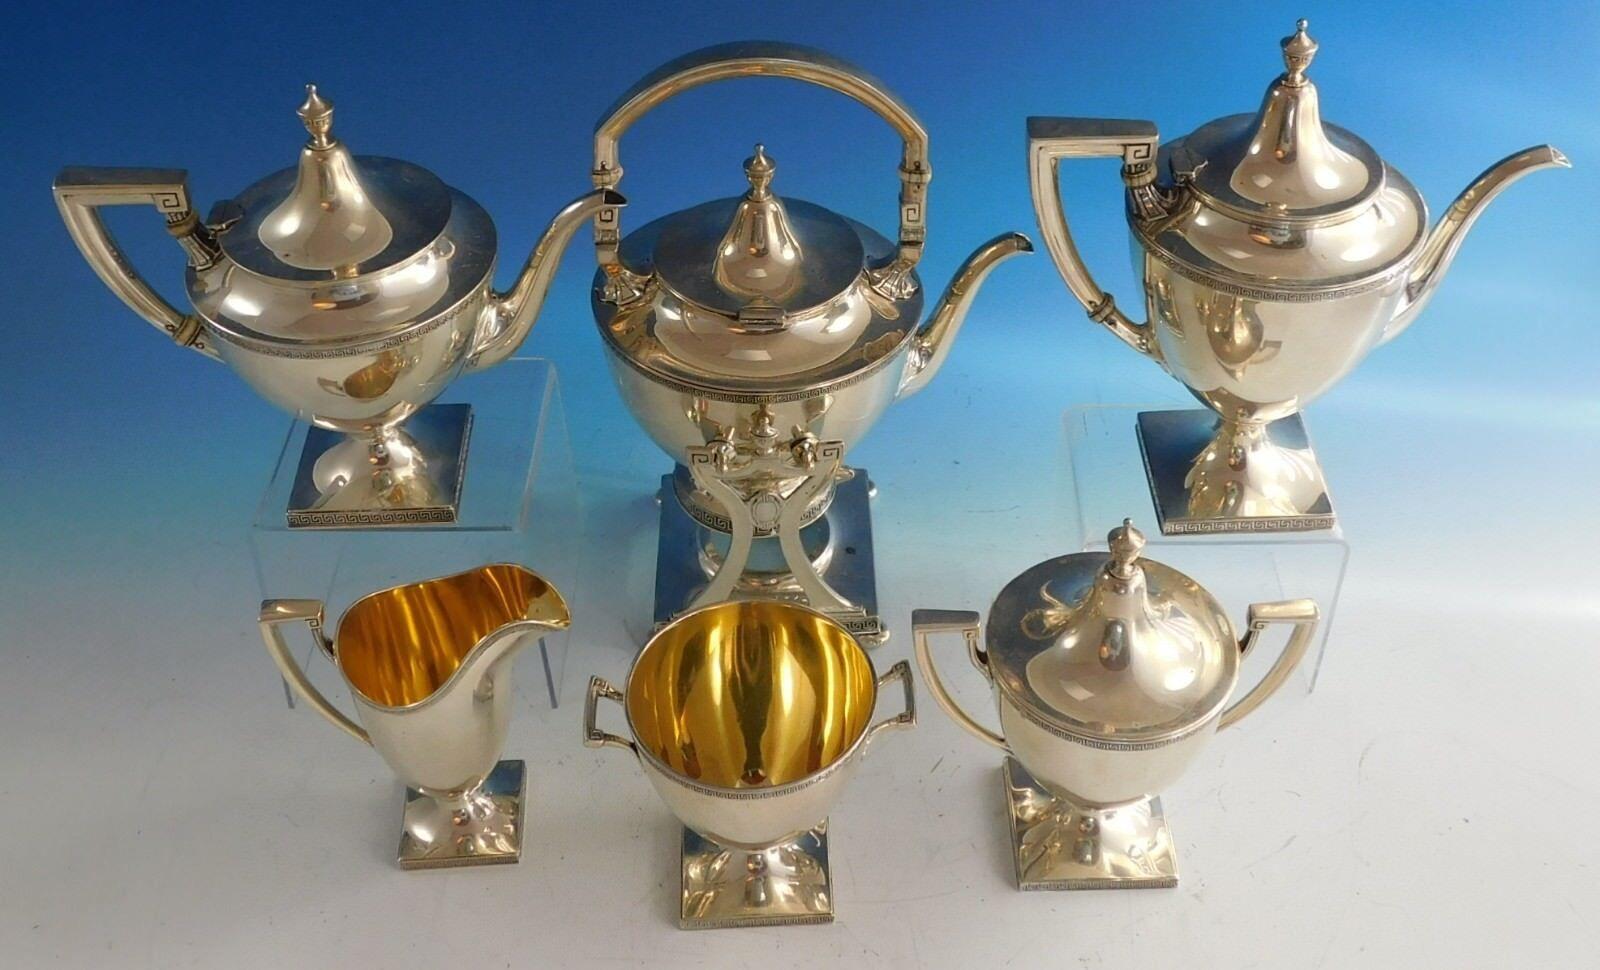 Etruscan by Gorham

Etruscan by Gorham sterling silver 6-piece tea set with date marks for 1923. The set includes: 

1 - Kettle on Stand: Marked with #A9806, it weighs 42.11 ozt., and measures 12